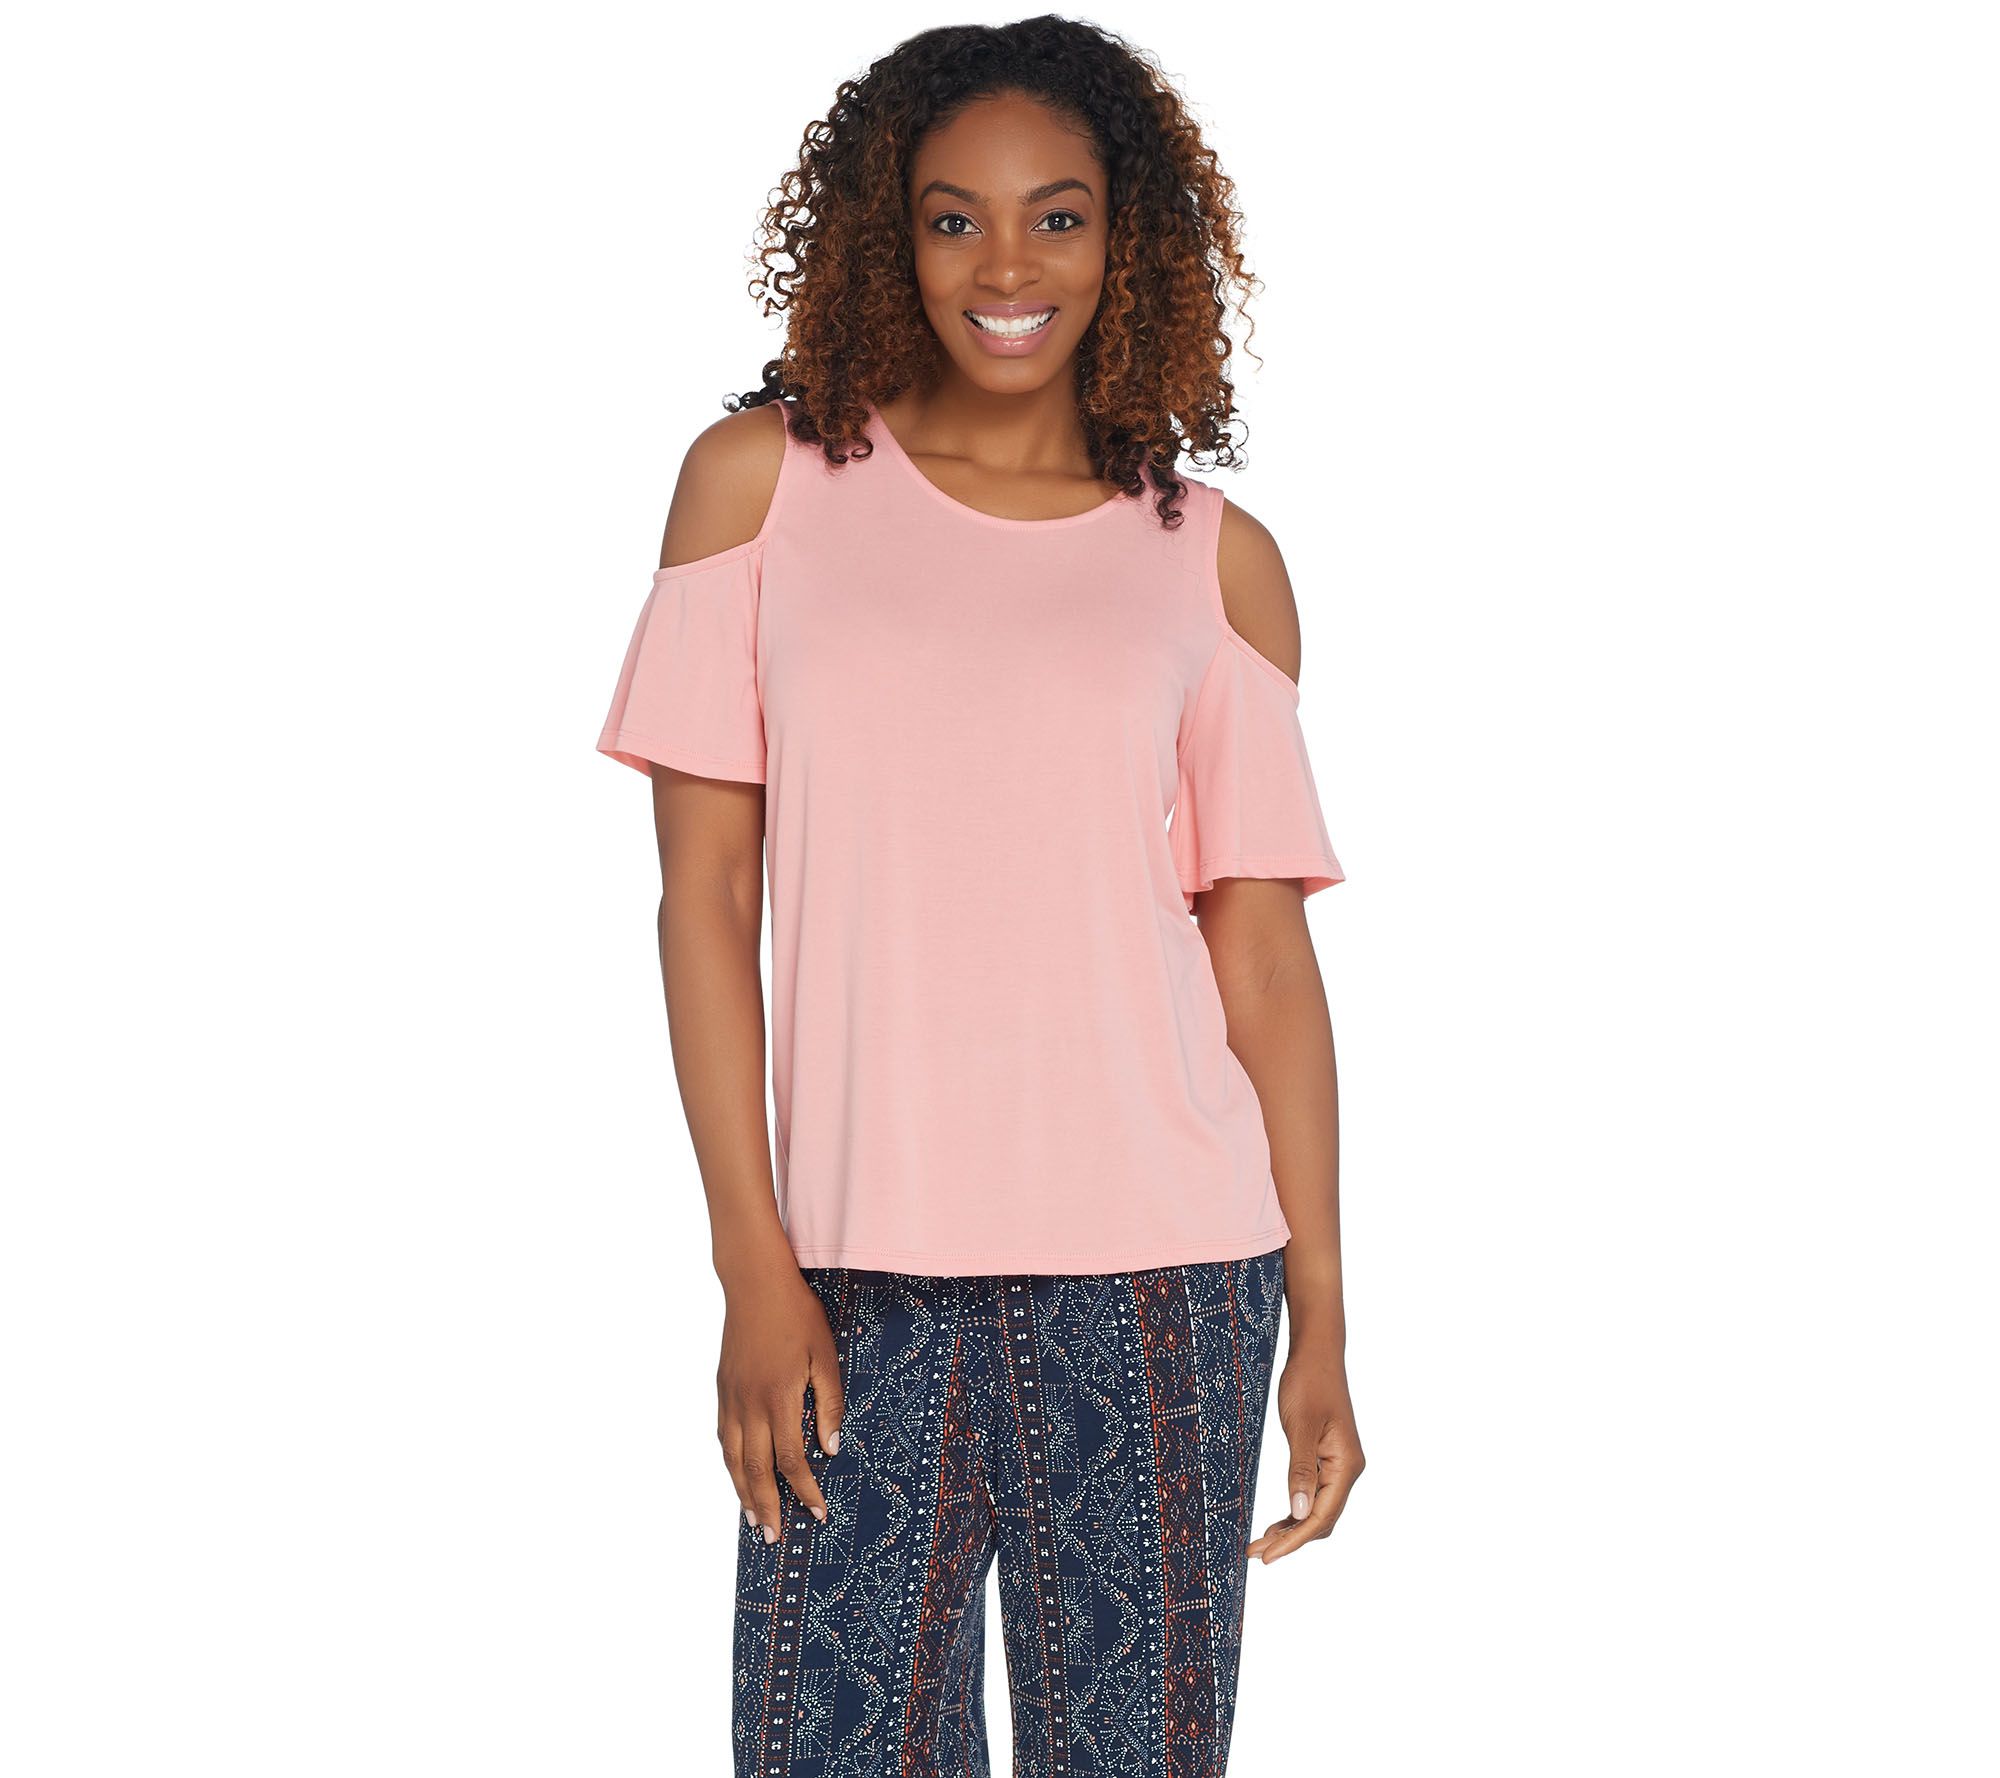 Kelly by Clinton Kelly Cold Shoulder Flutter Sleeve Knit Top - QVC.com